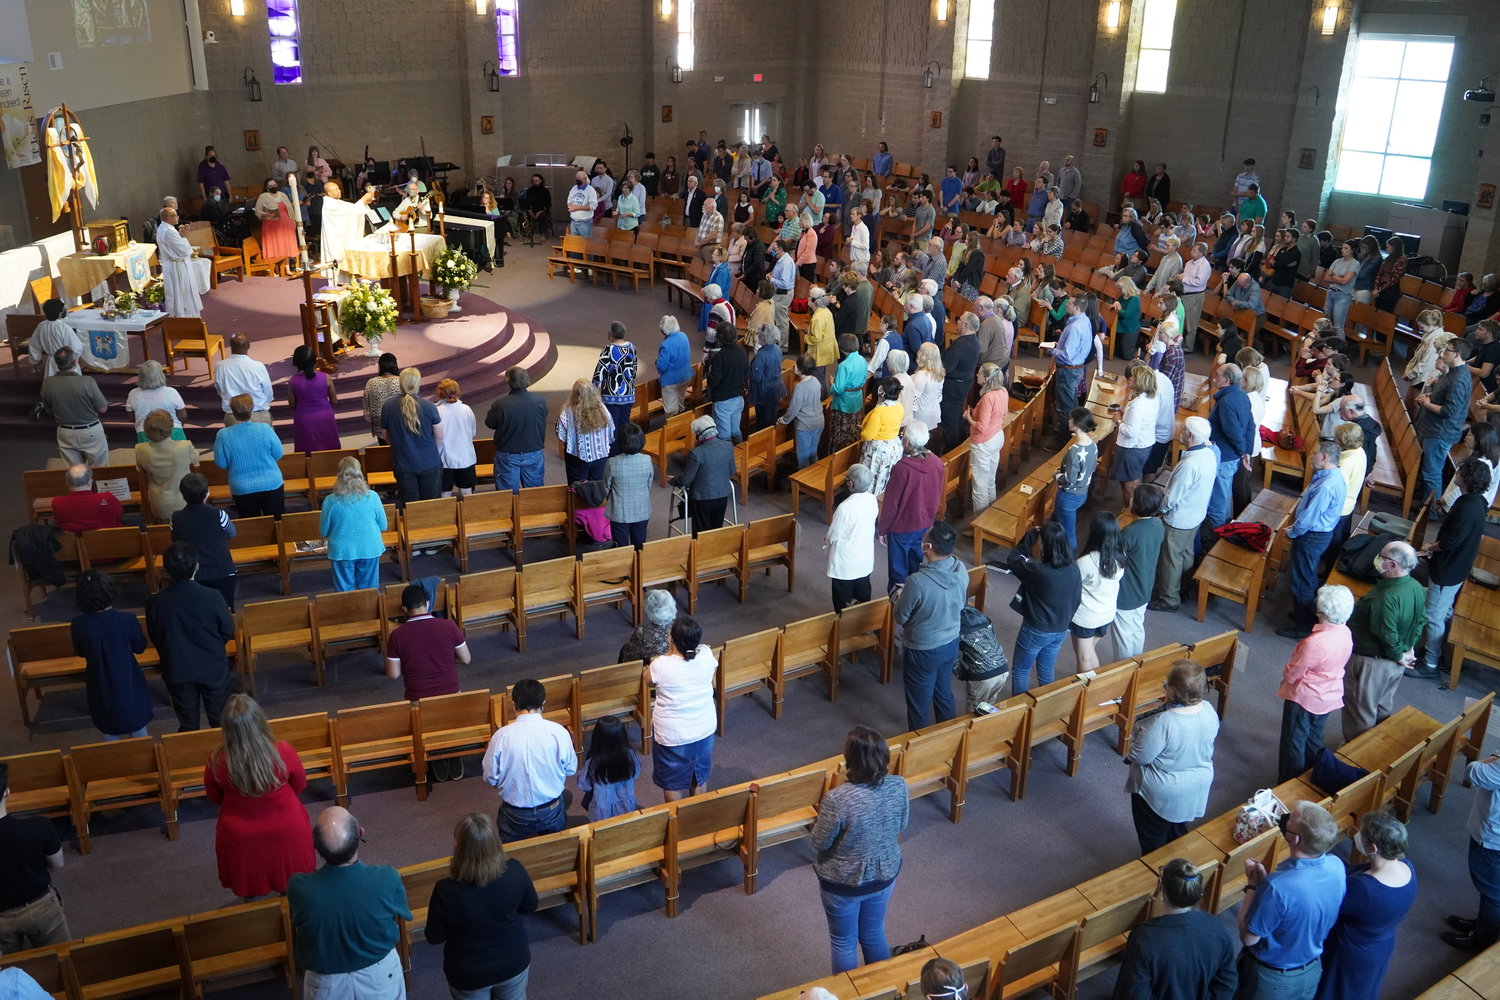 Parishioners and visitors gather around the altar for Mass in the St. Thomas More Newman Center Chapel in Columbia.